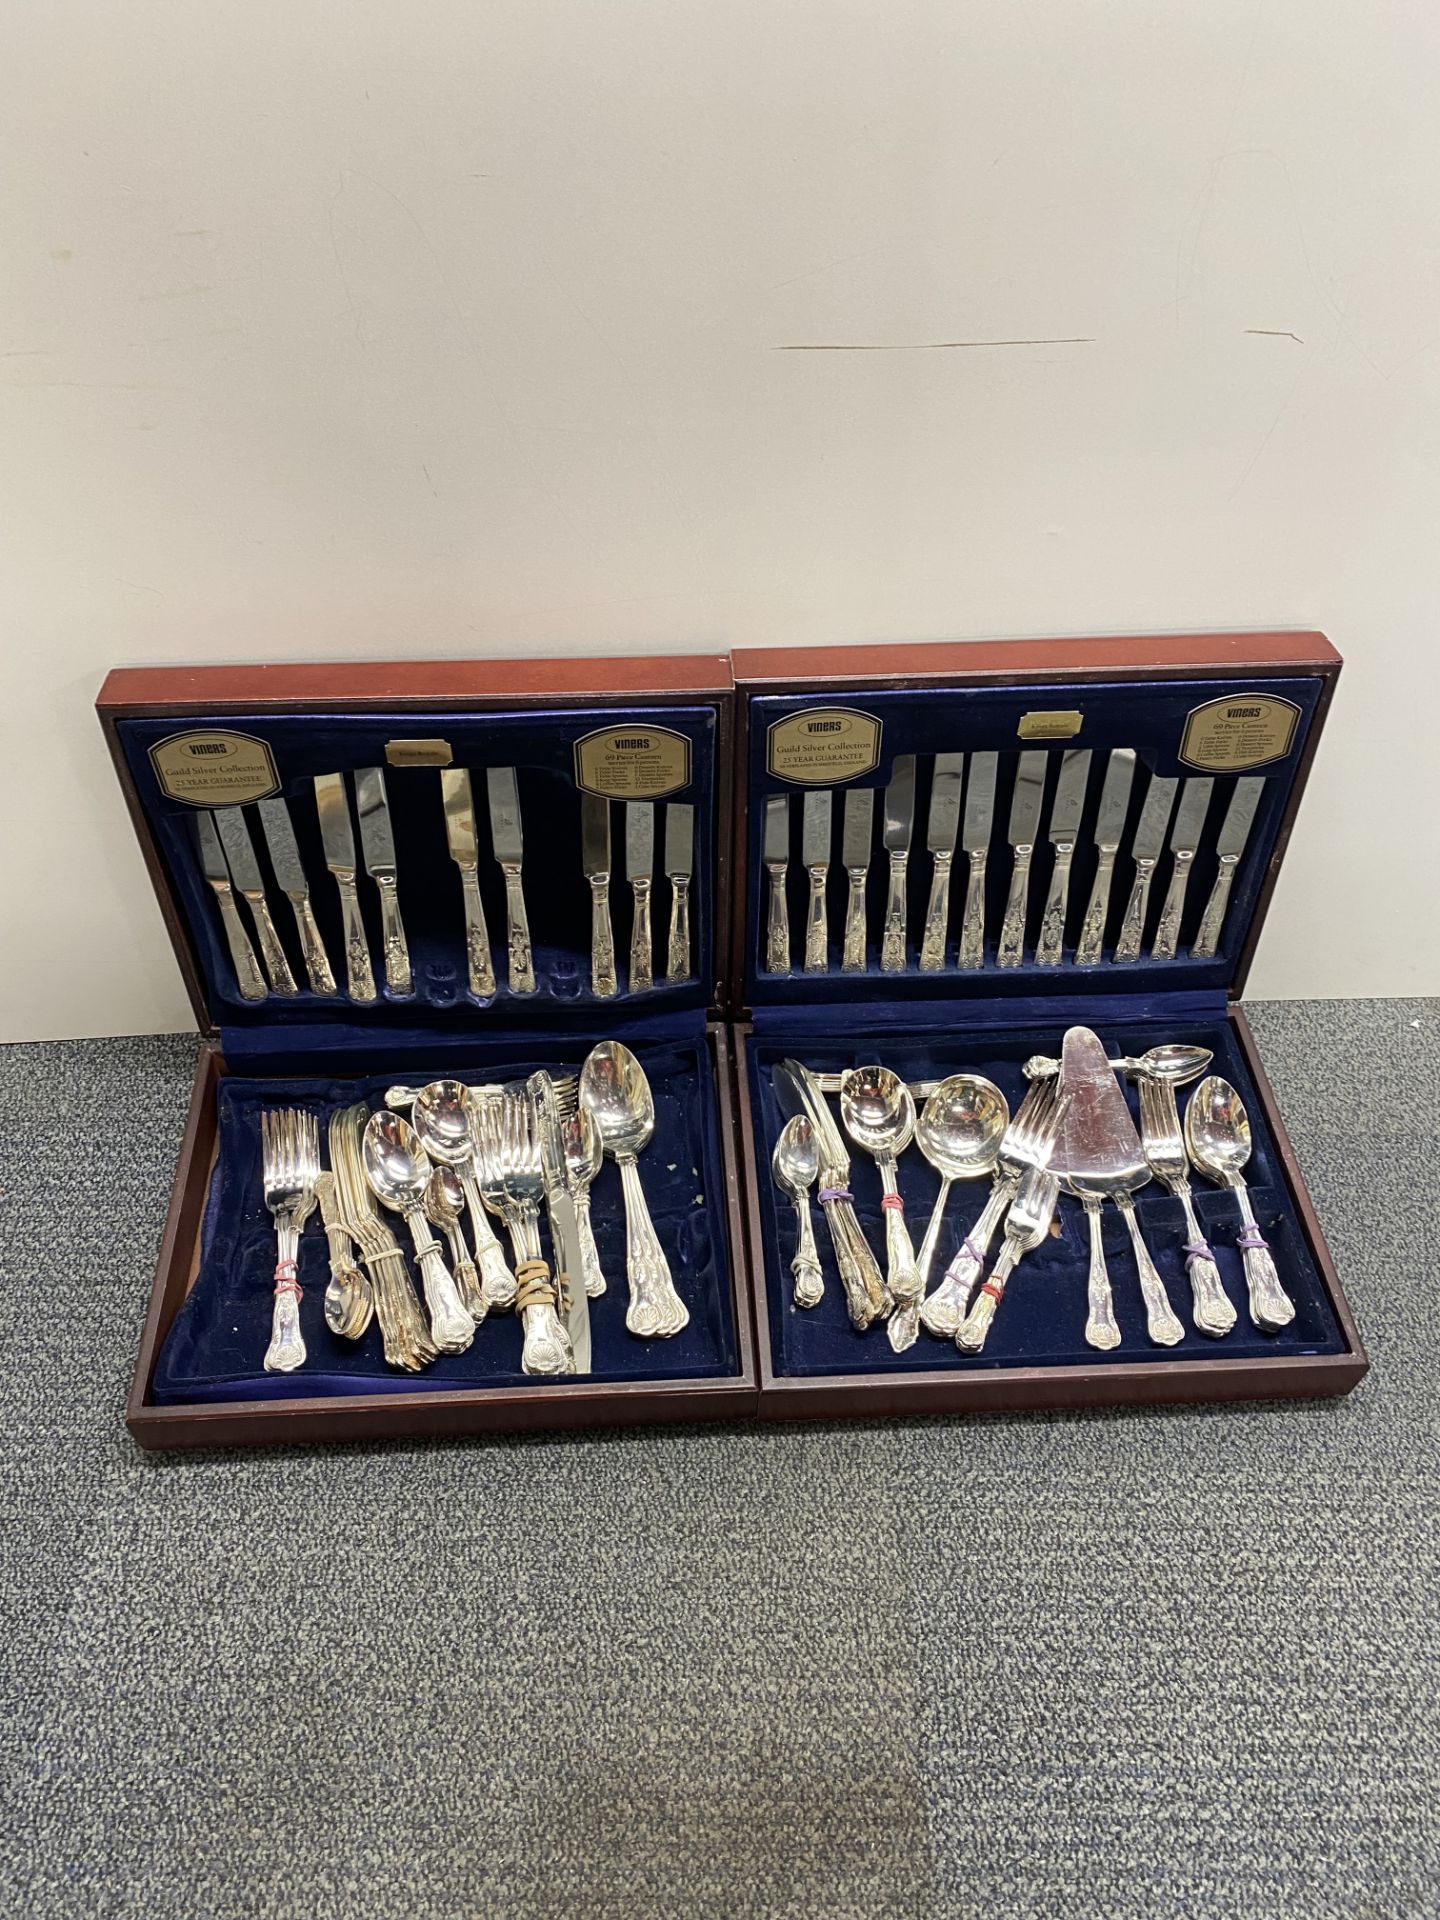 Two cased silverplated cutlery sets.